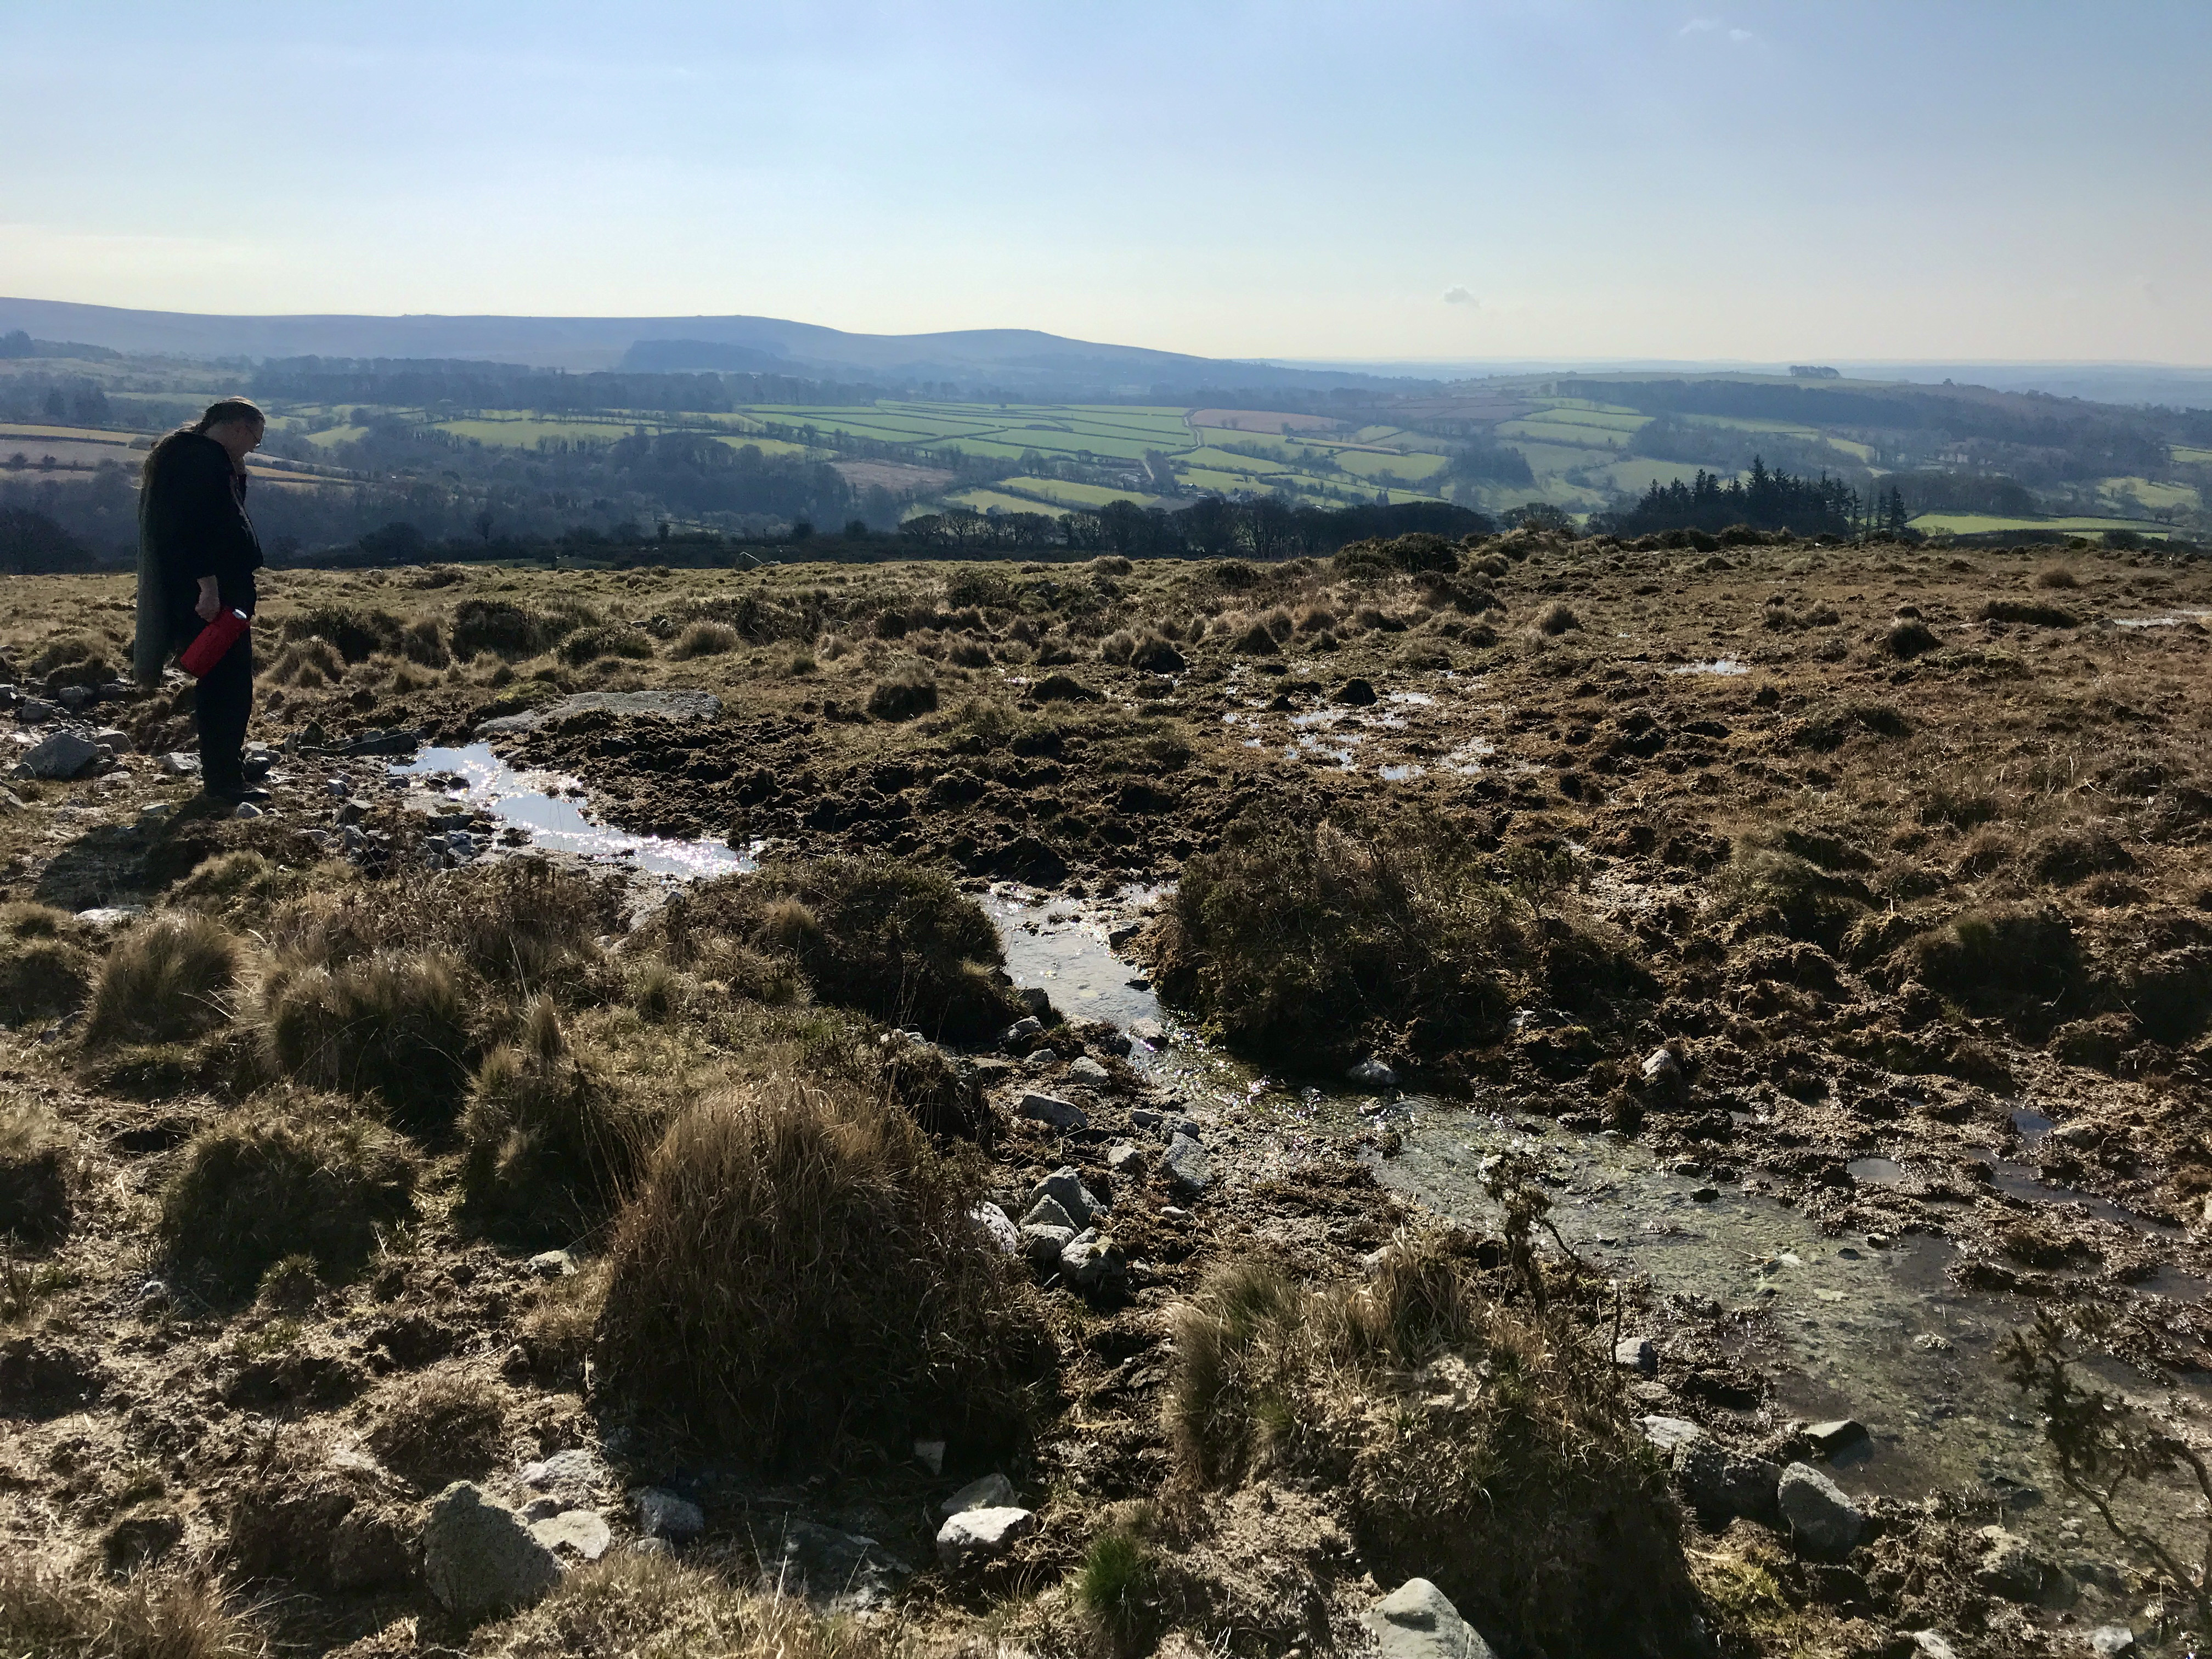 Landscape photo with a boggy area in the foreground and hills stretching away into the distance. A man is in show looking at the habitat.